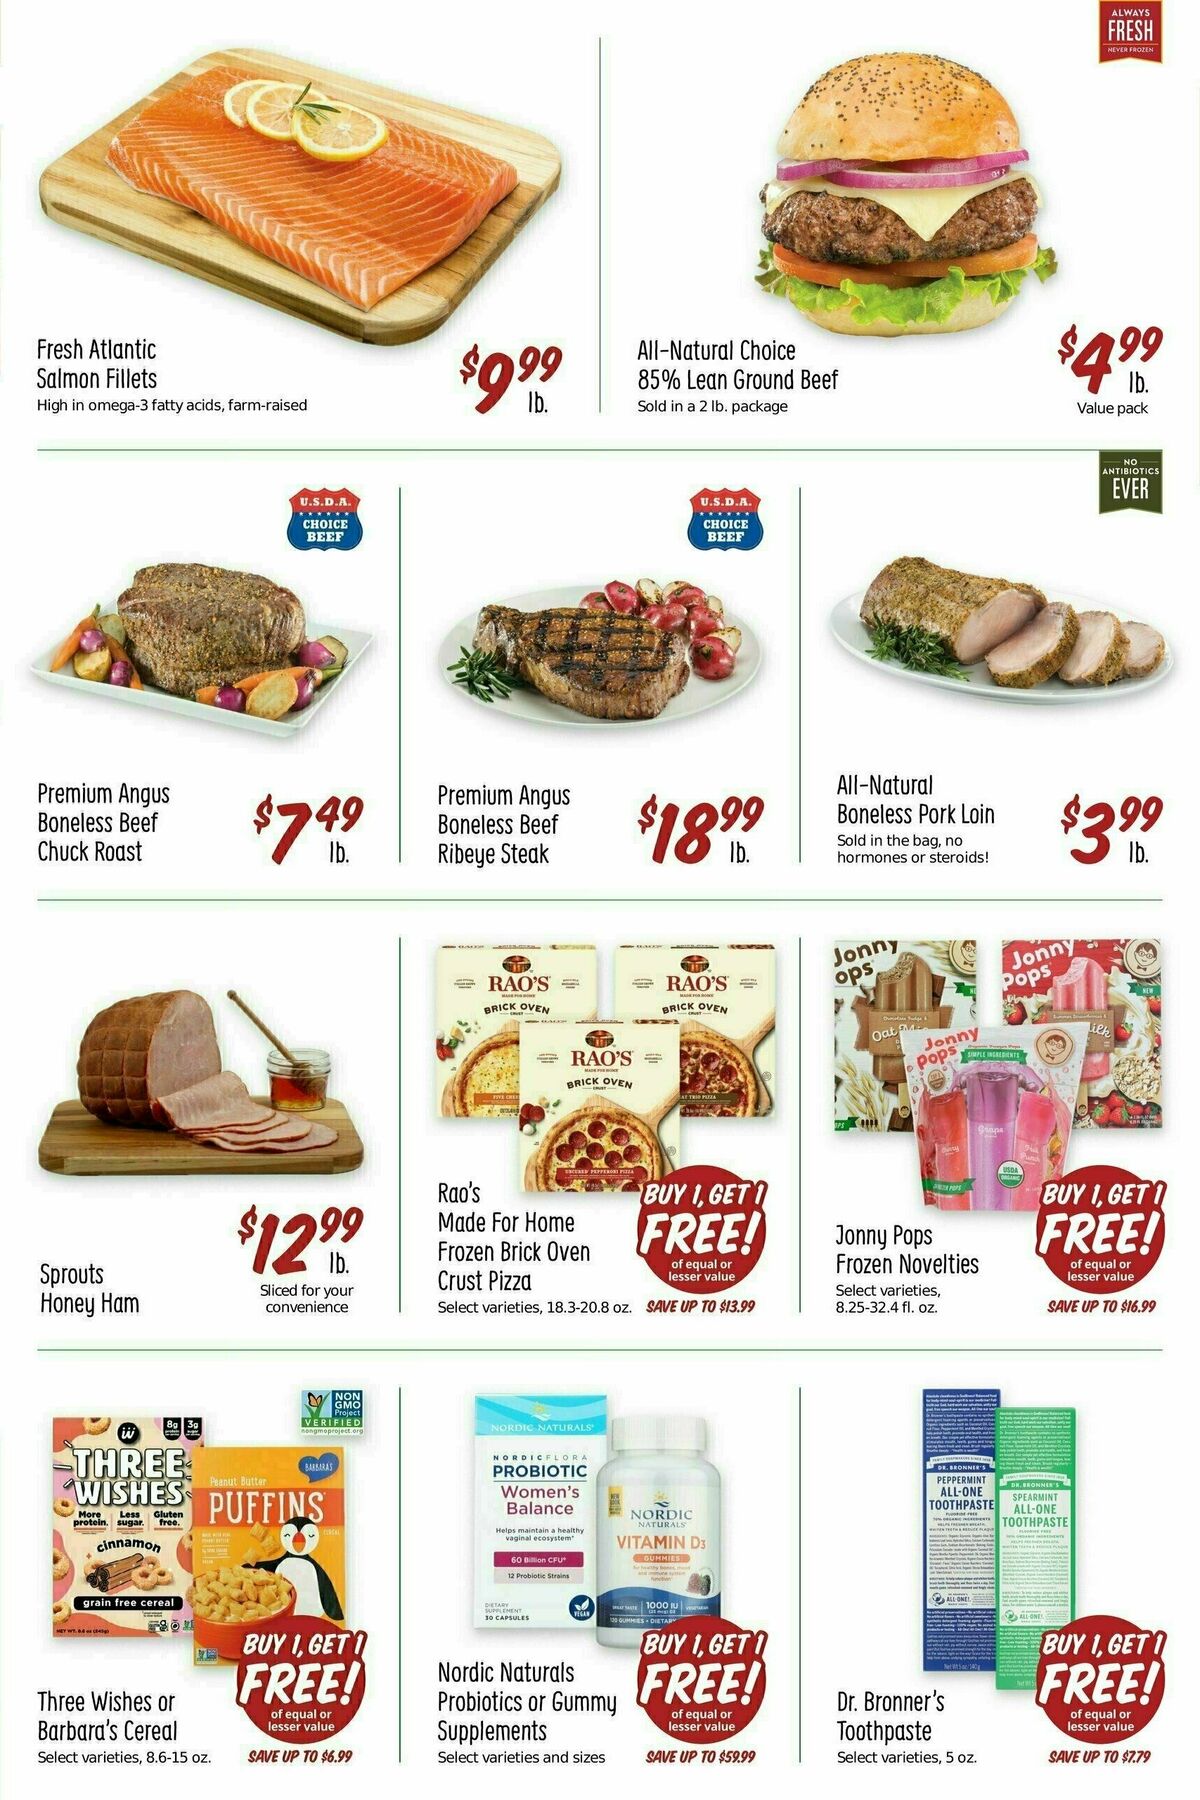 Sprouts Farmers Market Weekly Ad from August 23